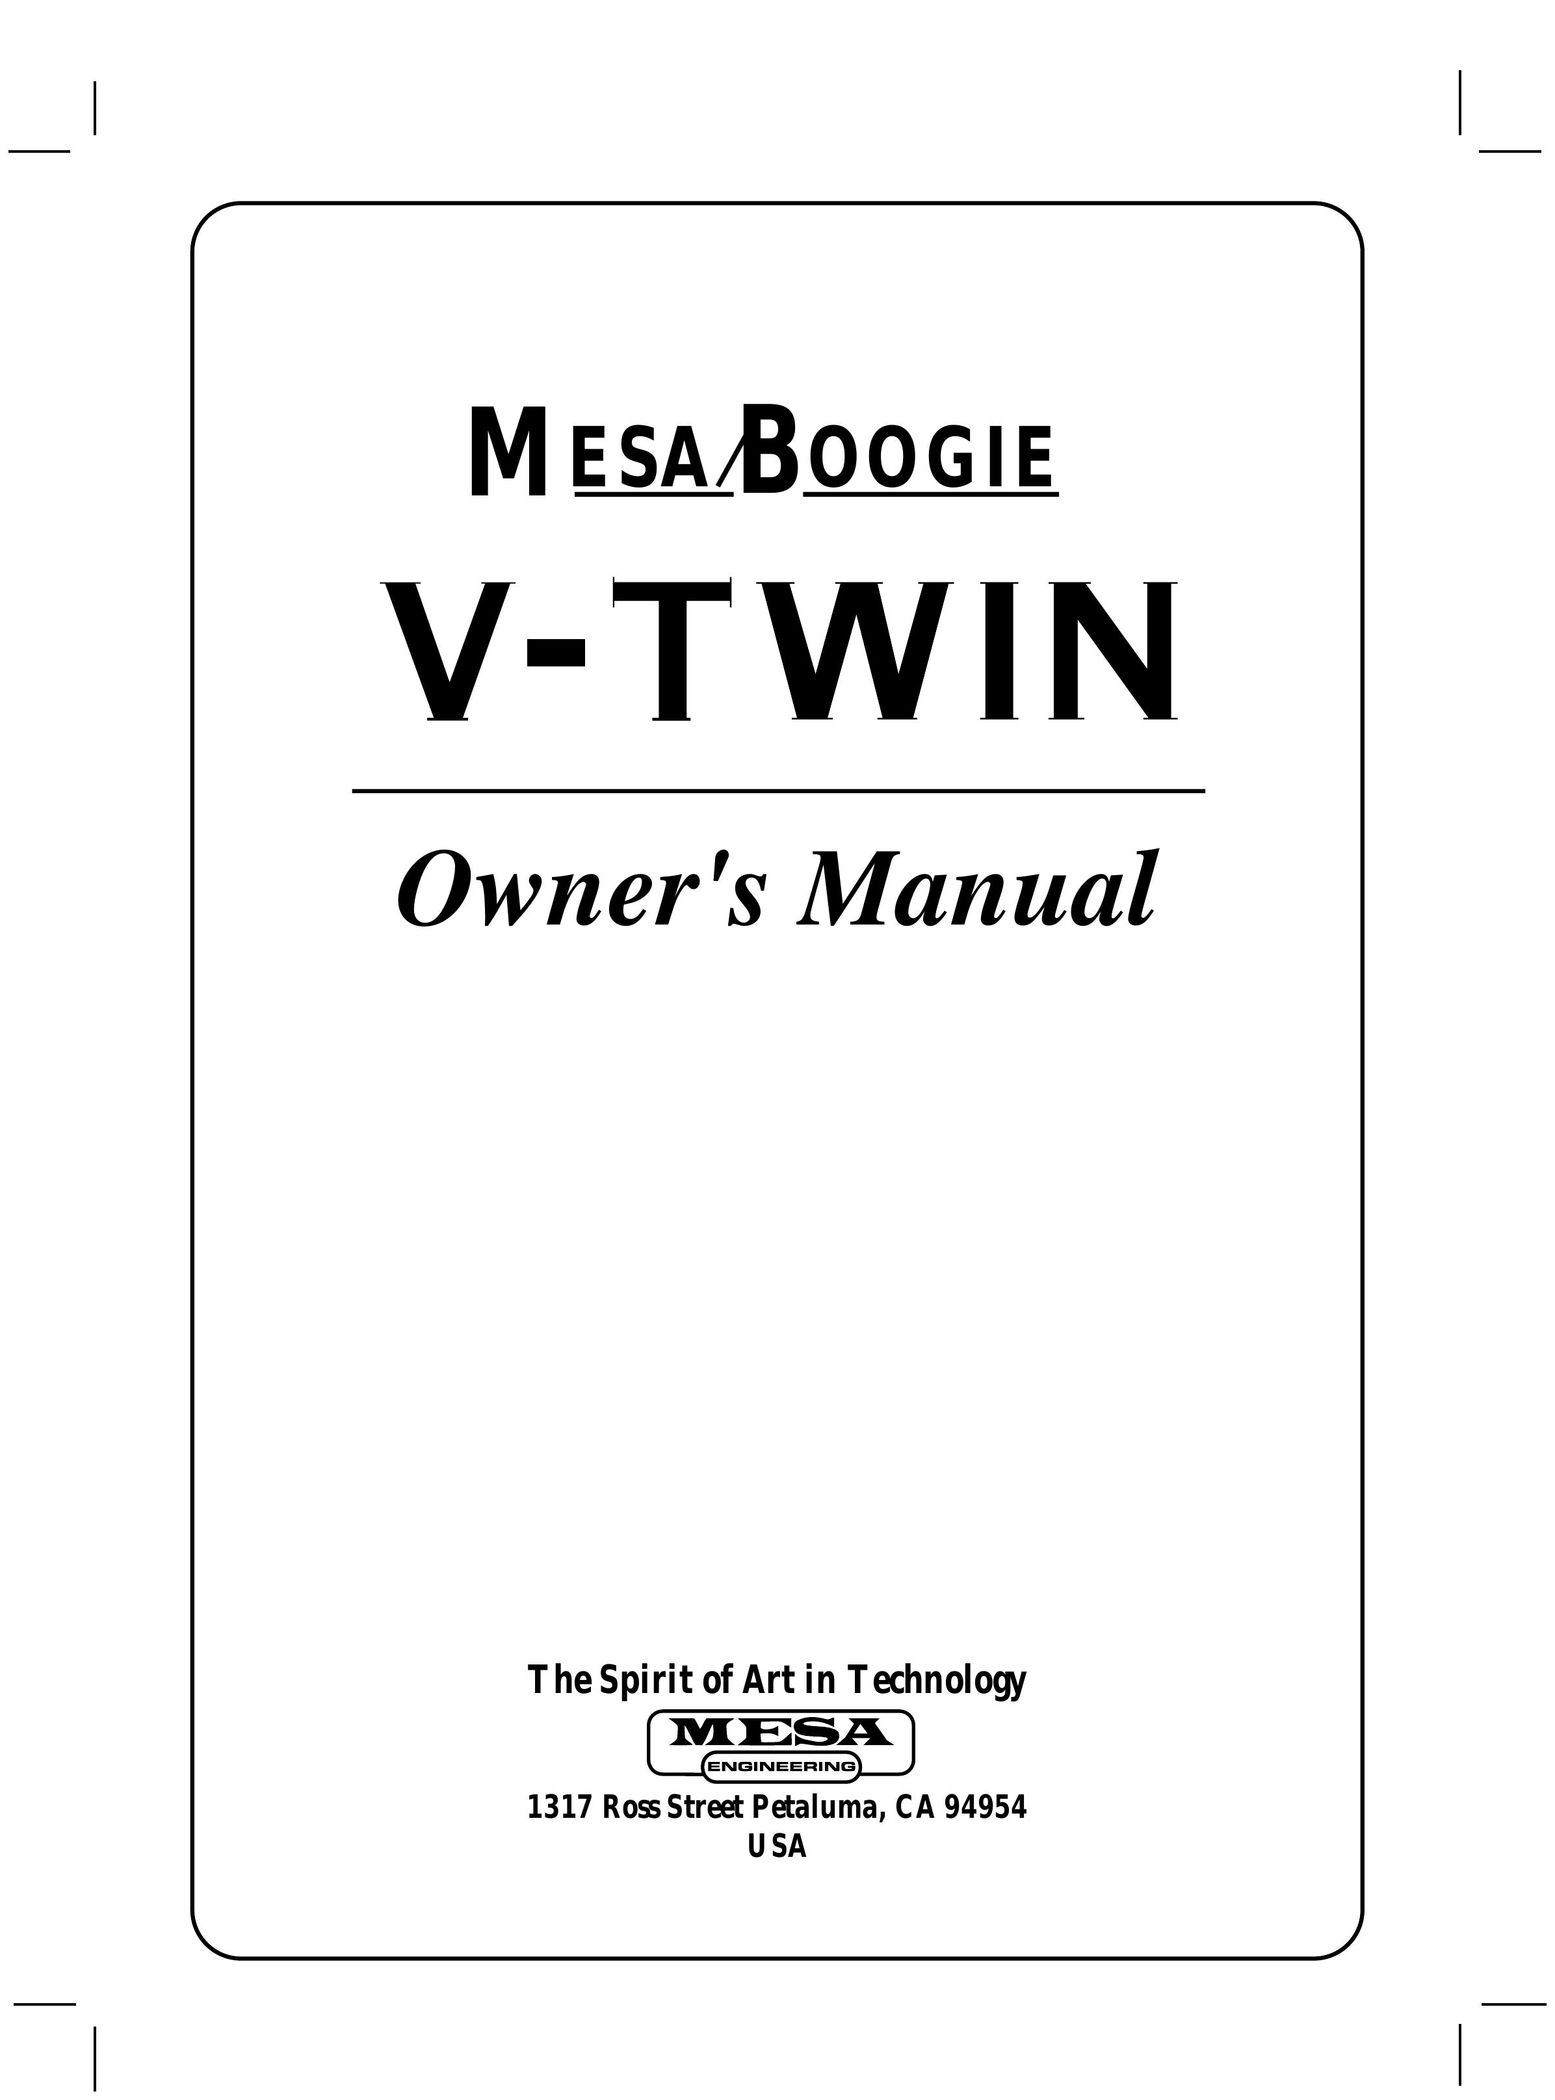 Mesa/Boogie V-TWIN Stereo Amplifier User Manual